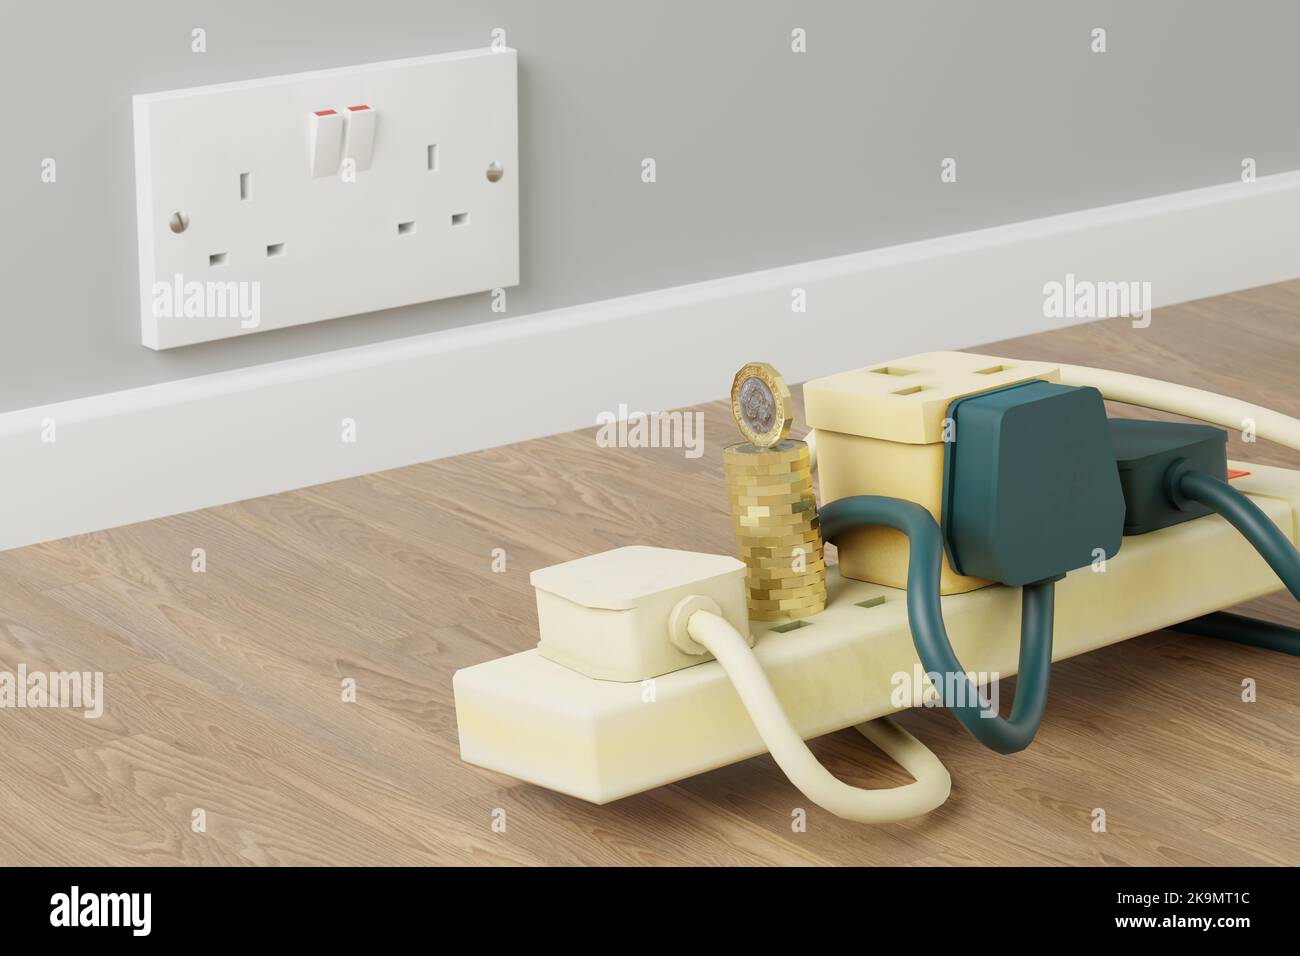 United Kingdom Electric Plug Socket with British Pound Coin, Energy Crisis Concept, 3D Illustration Stock Photo